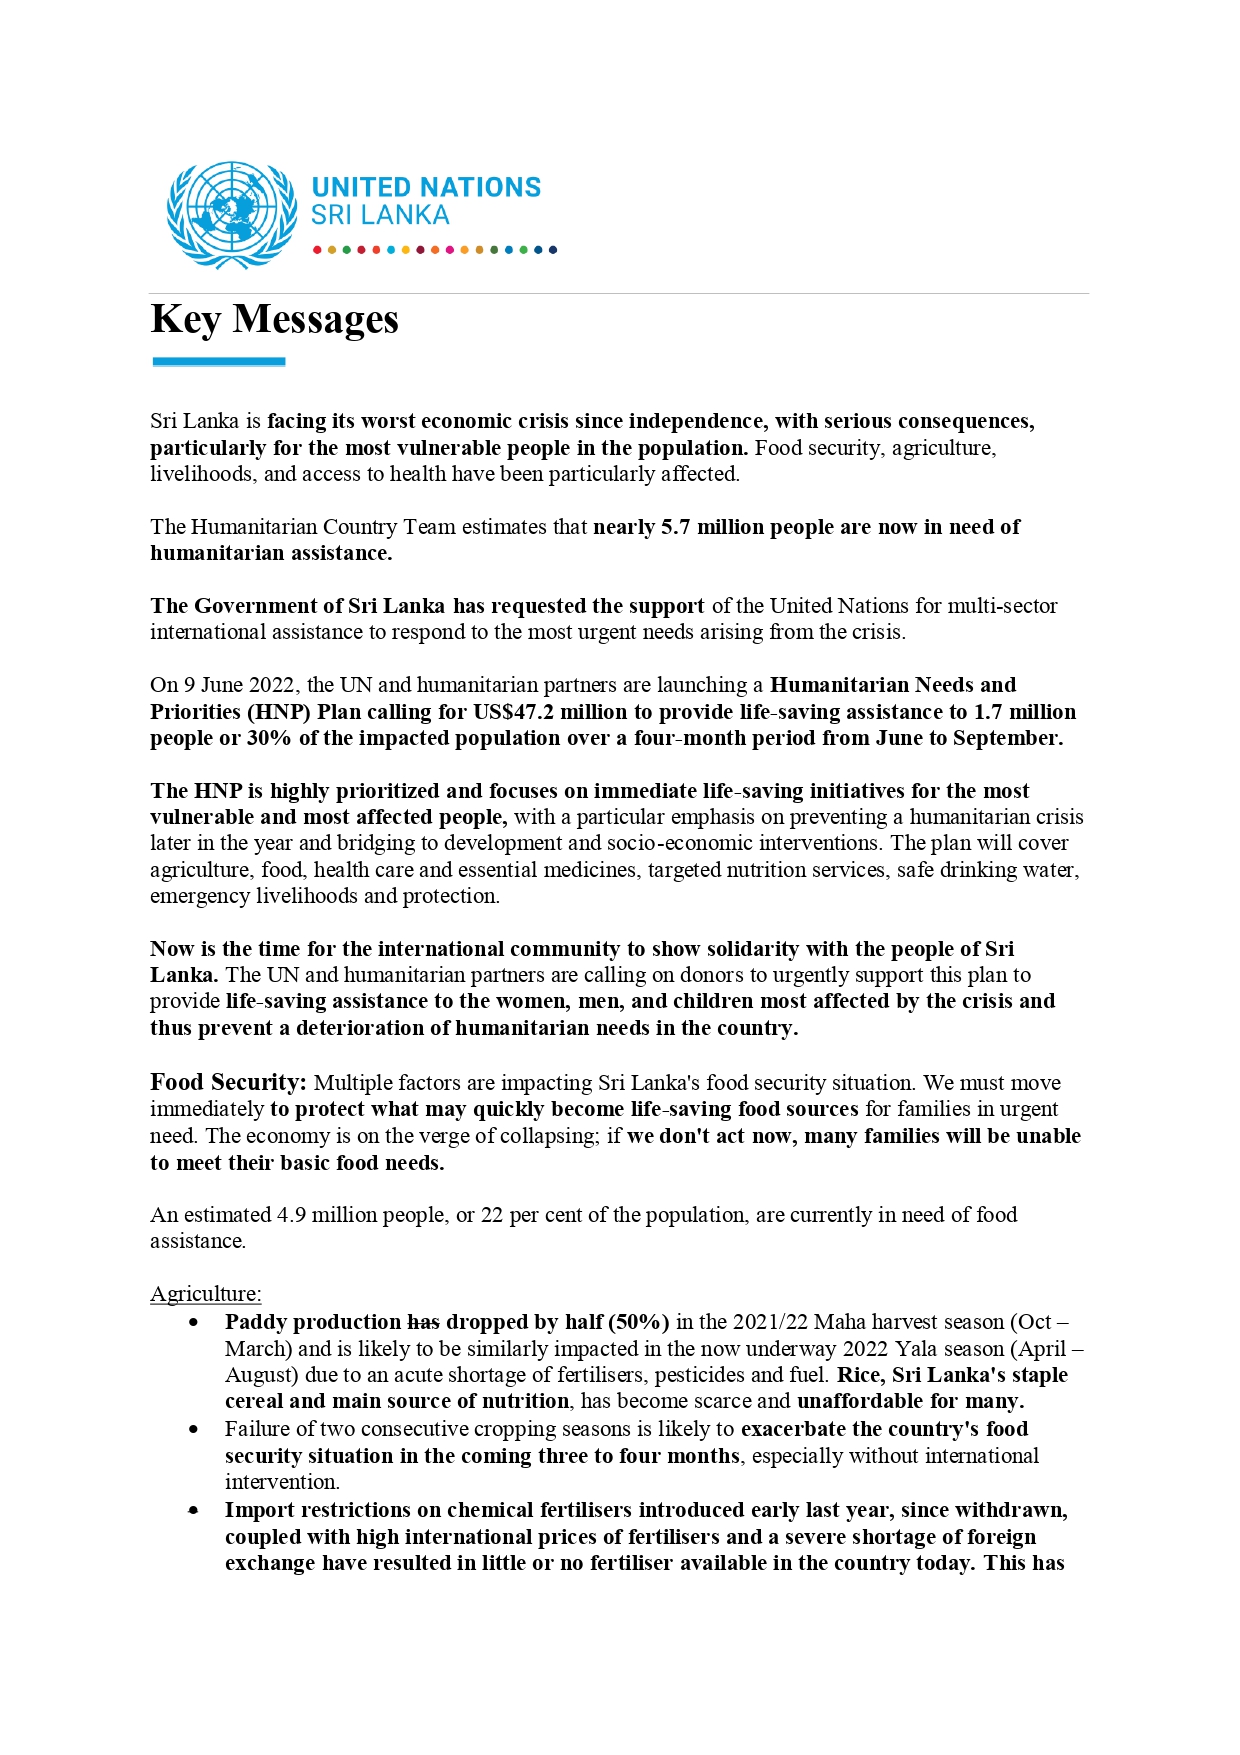 20220609 HNP Key Messages page 0001